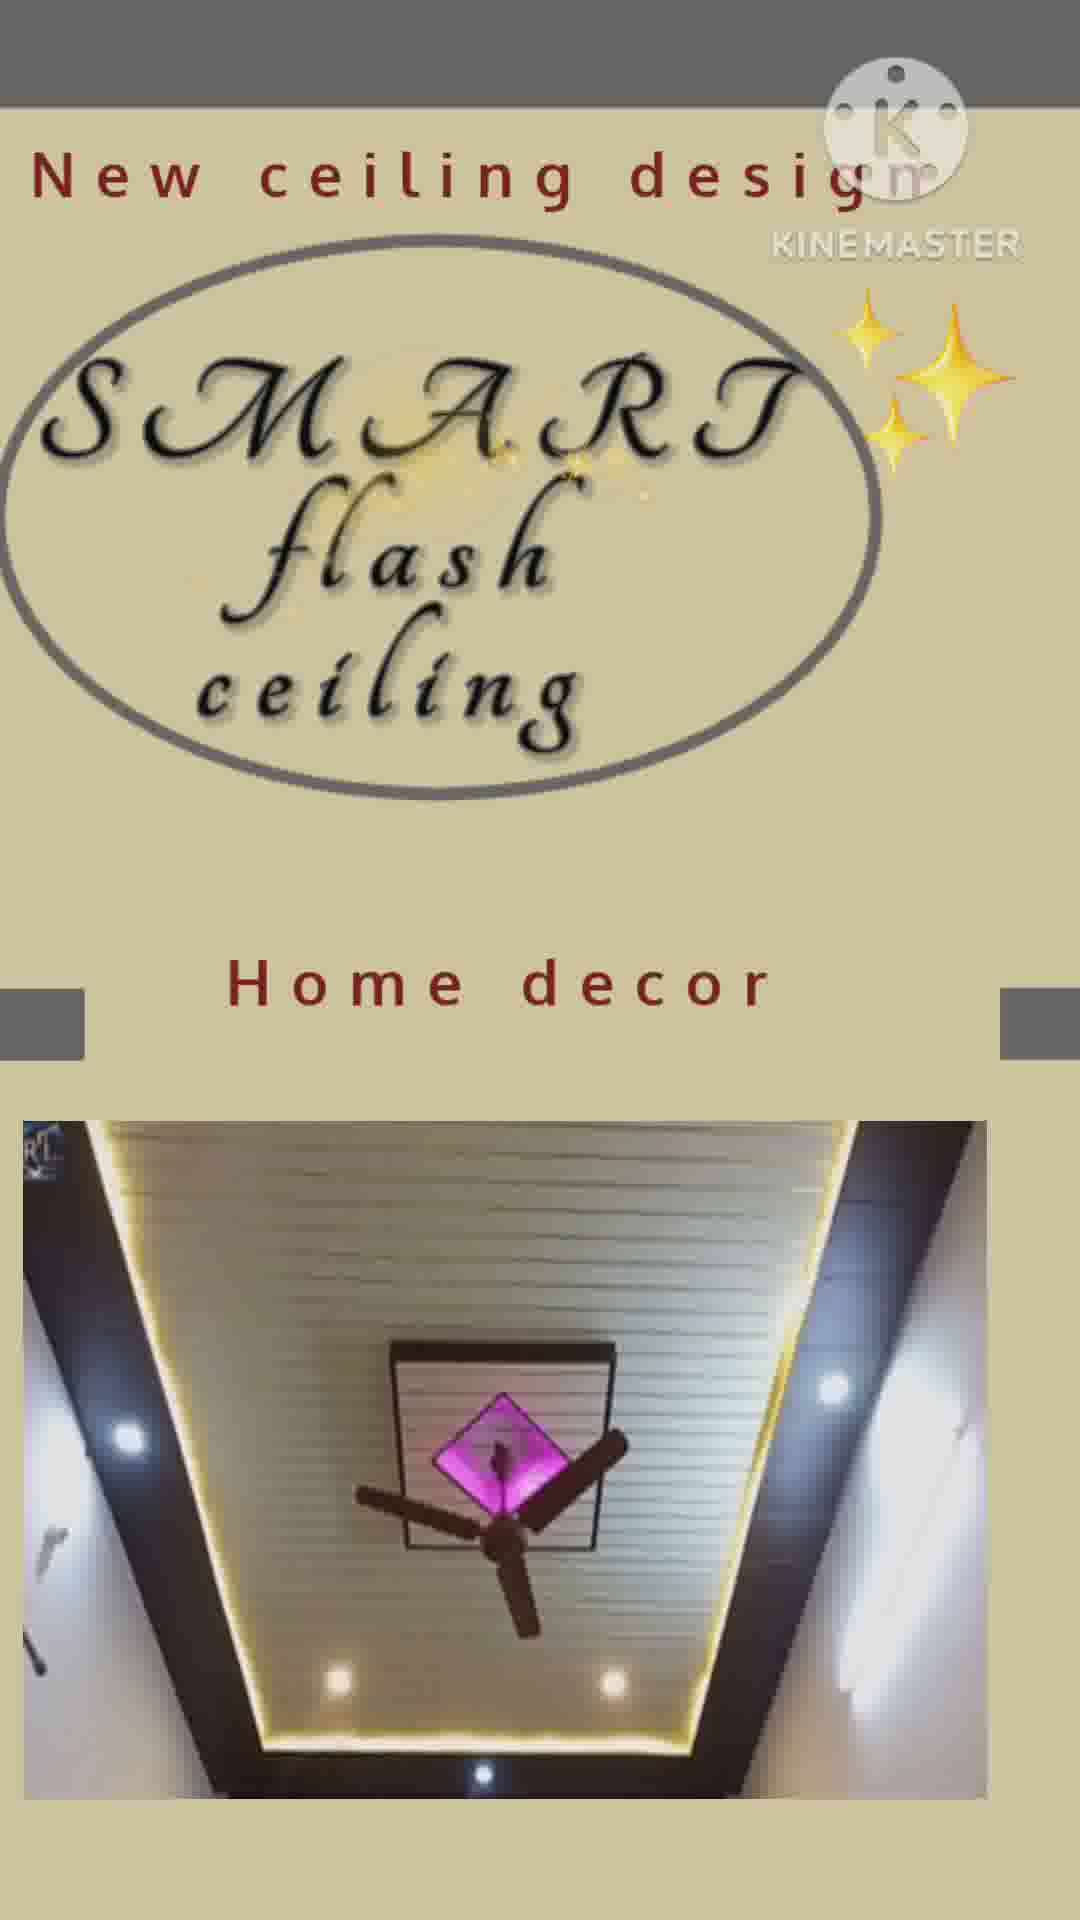 New flash ceiling design ideas 2022 #newvideo #newcollection  #newyearwish